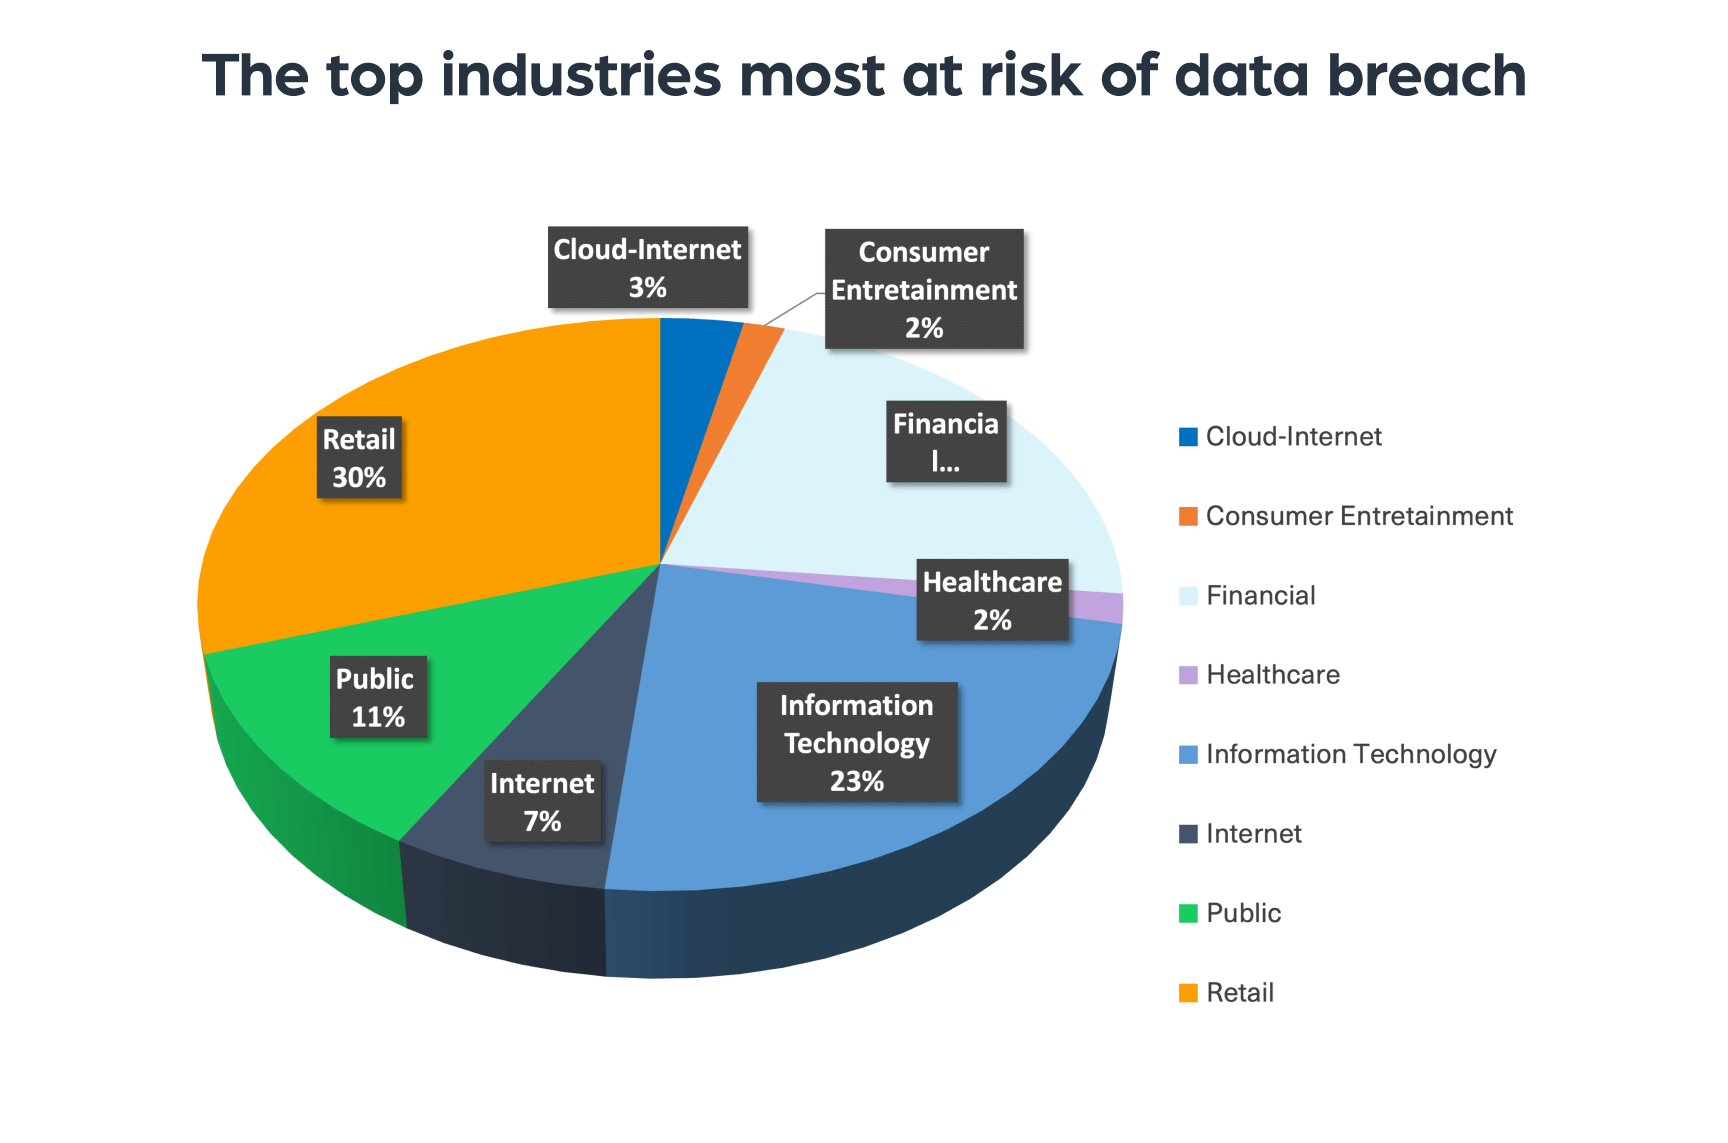 The top industries most at risk of data breach